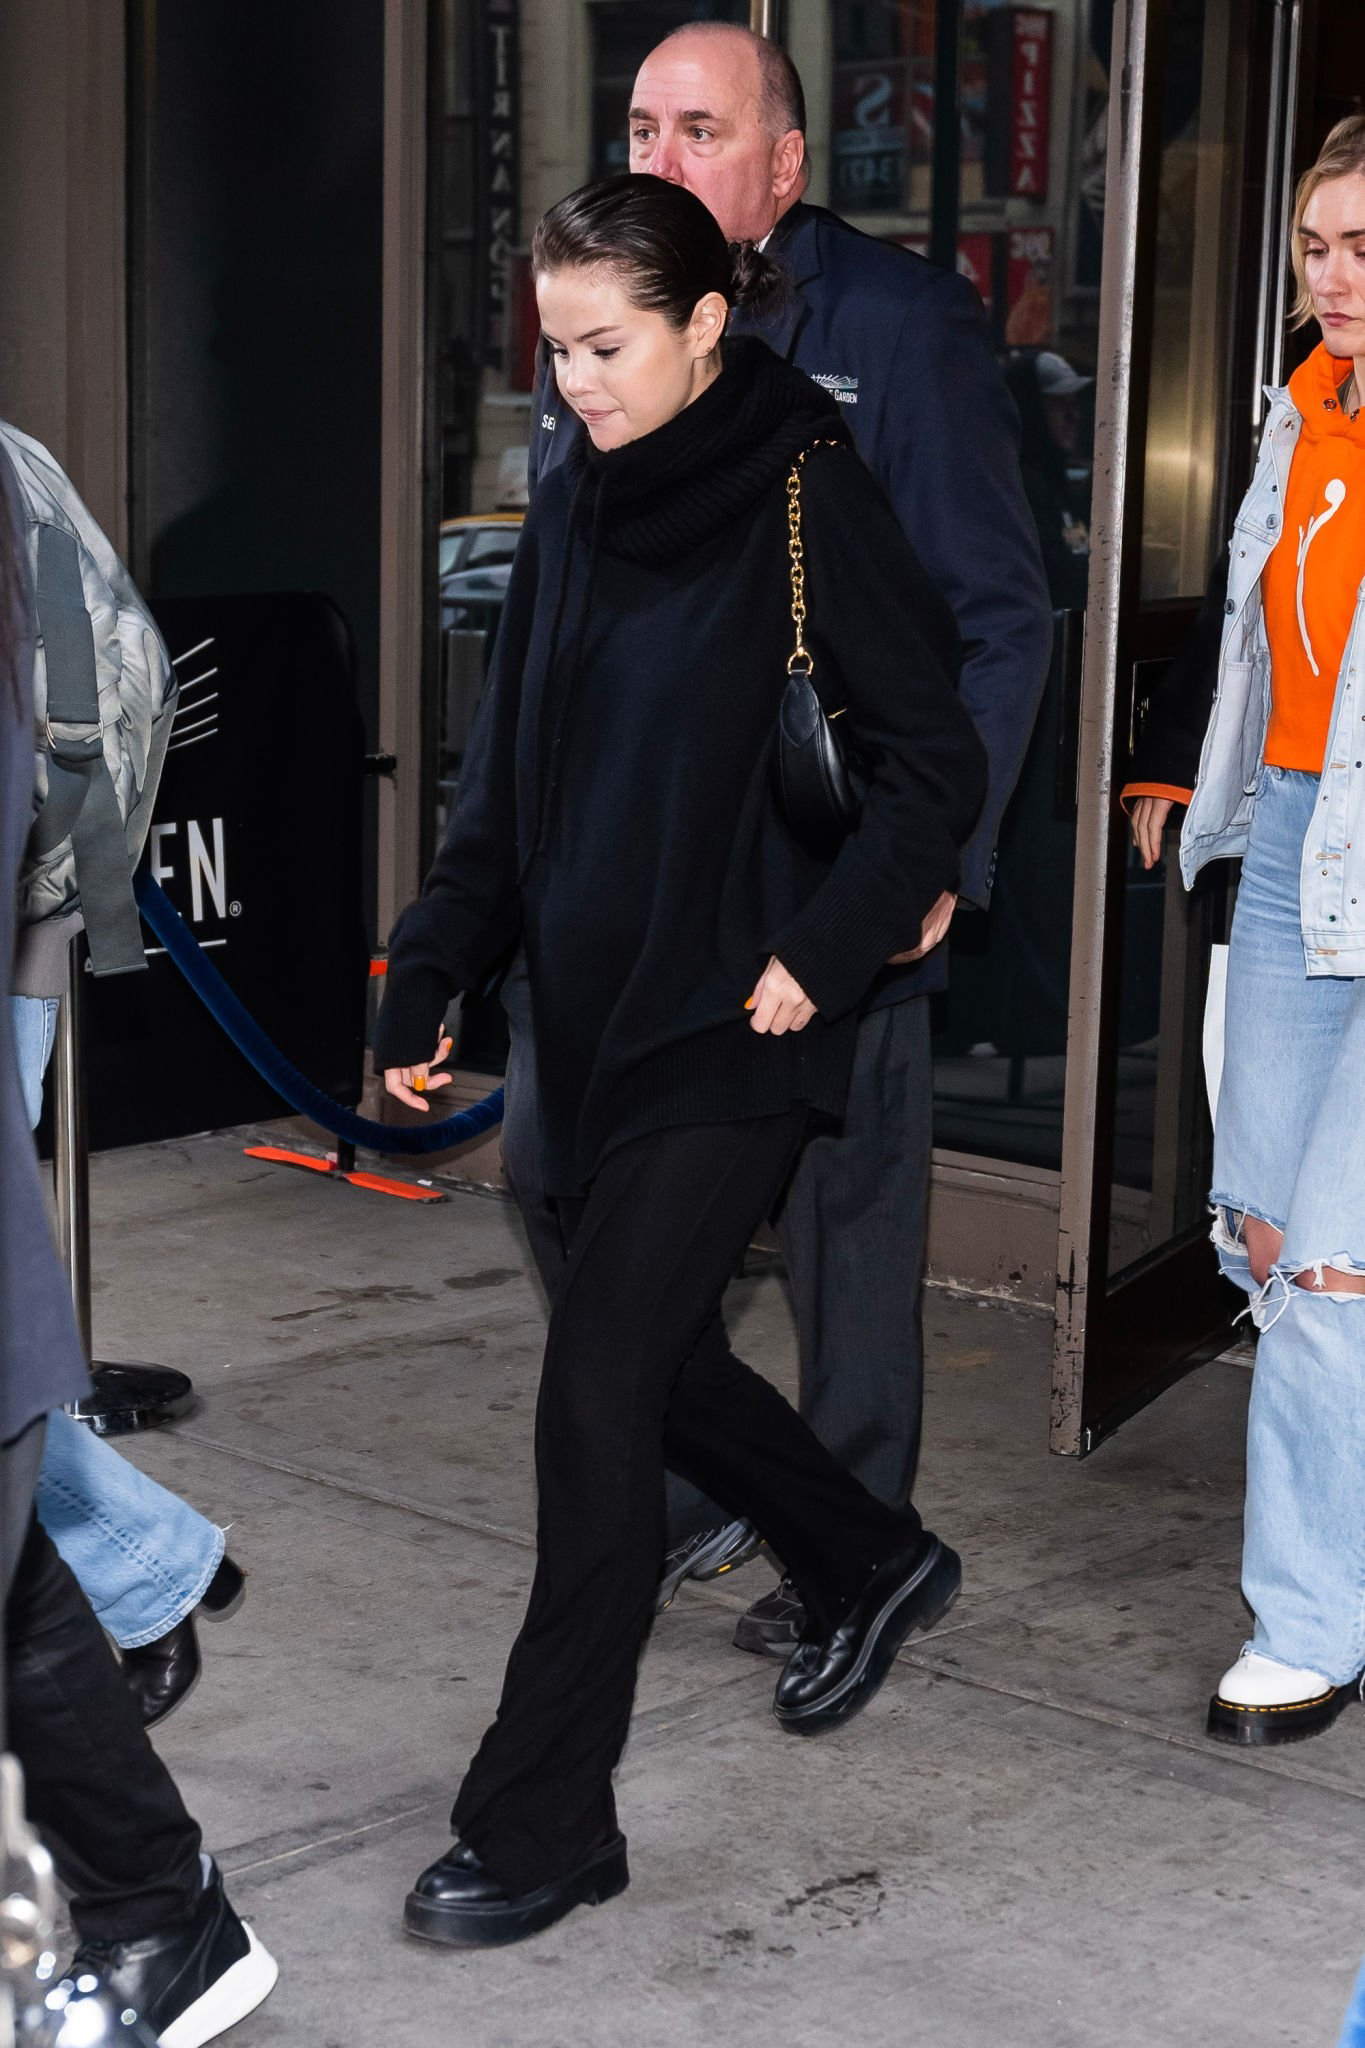 Selena Gomez rocks all black outfit as she attends a Knicks game